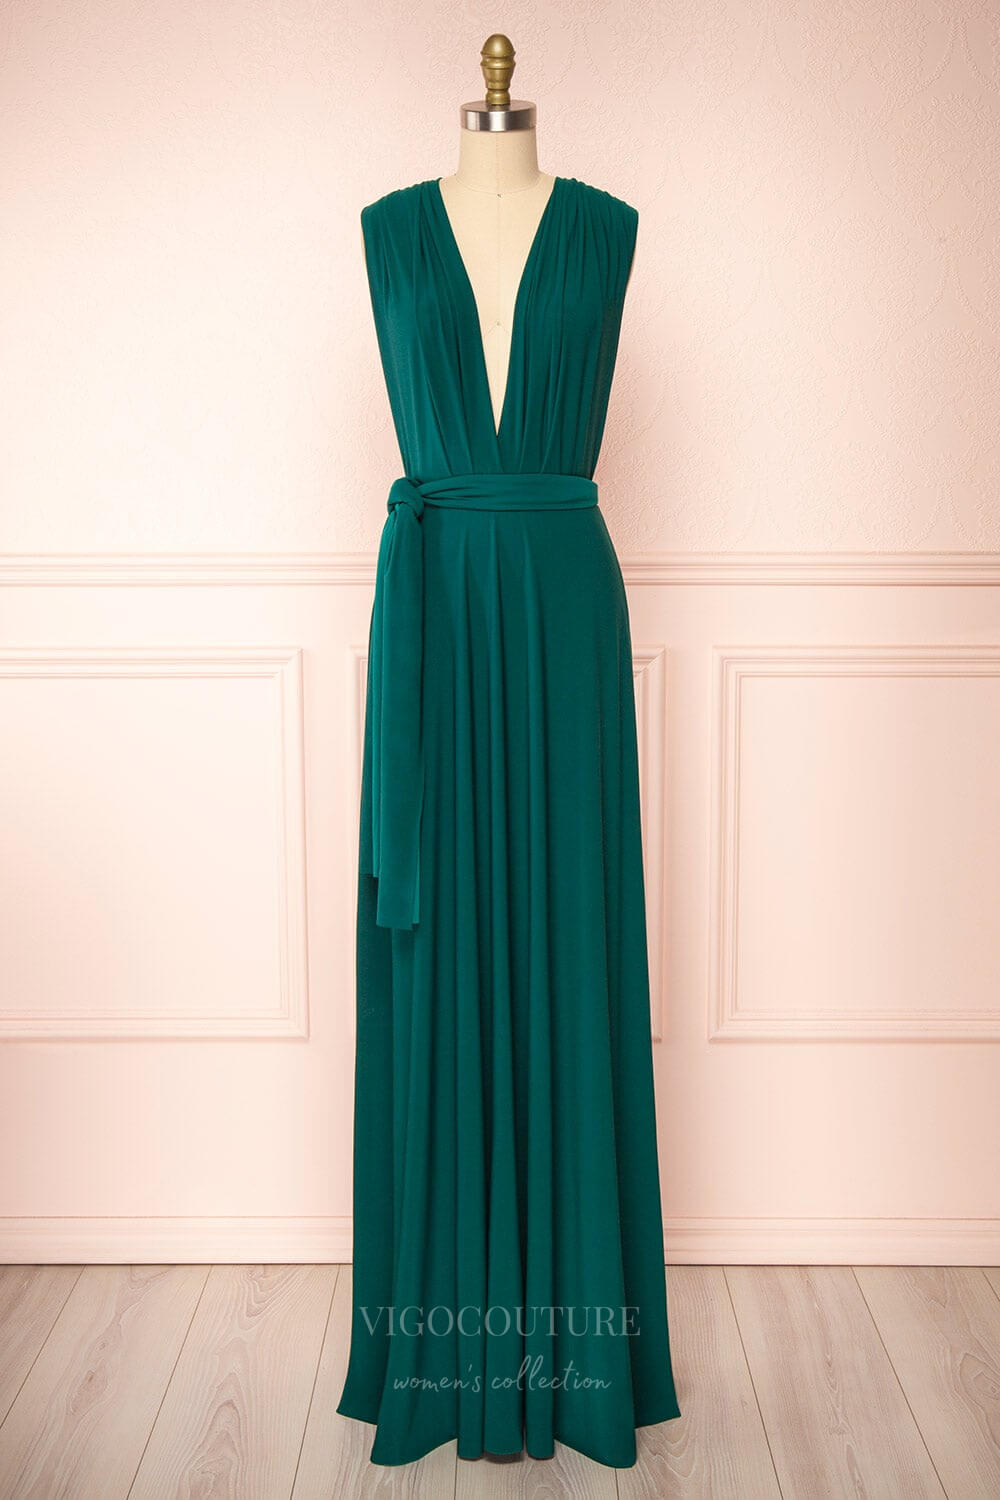 vigocouture-Convertible Bridesmaid Dress Stretchable Woven Dress Pleated Prom Dress Multiway Dress 20860-Green-Prom Dresses-vigocouture-Green-US2-